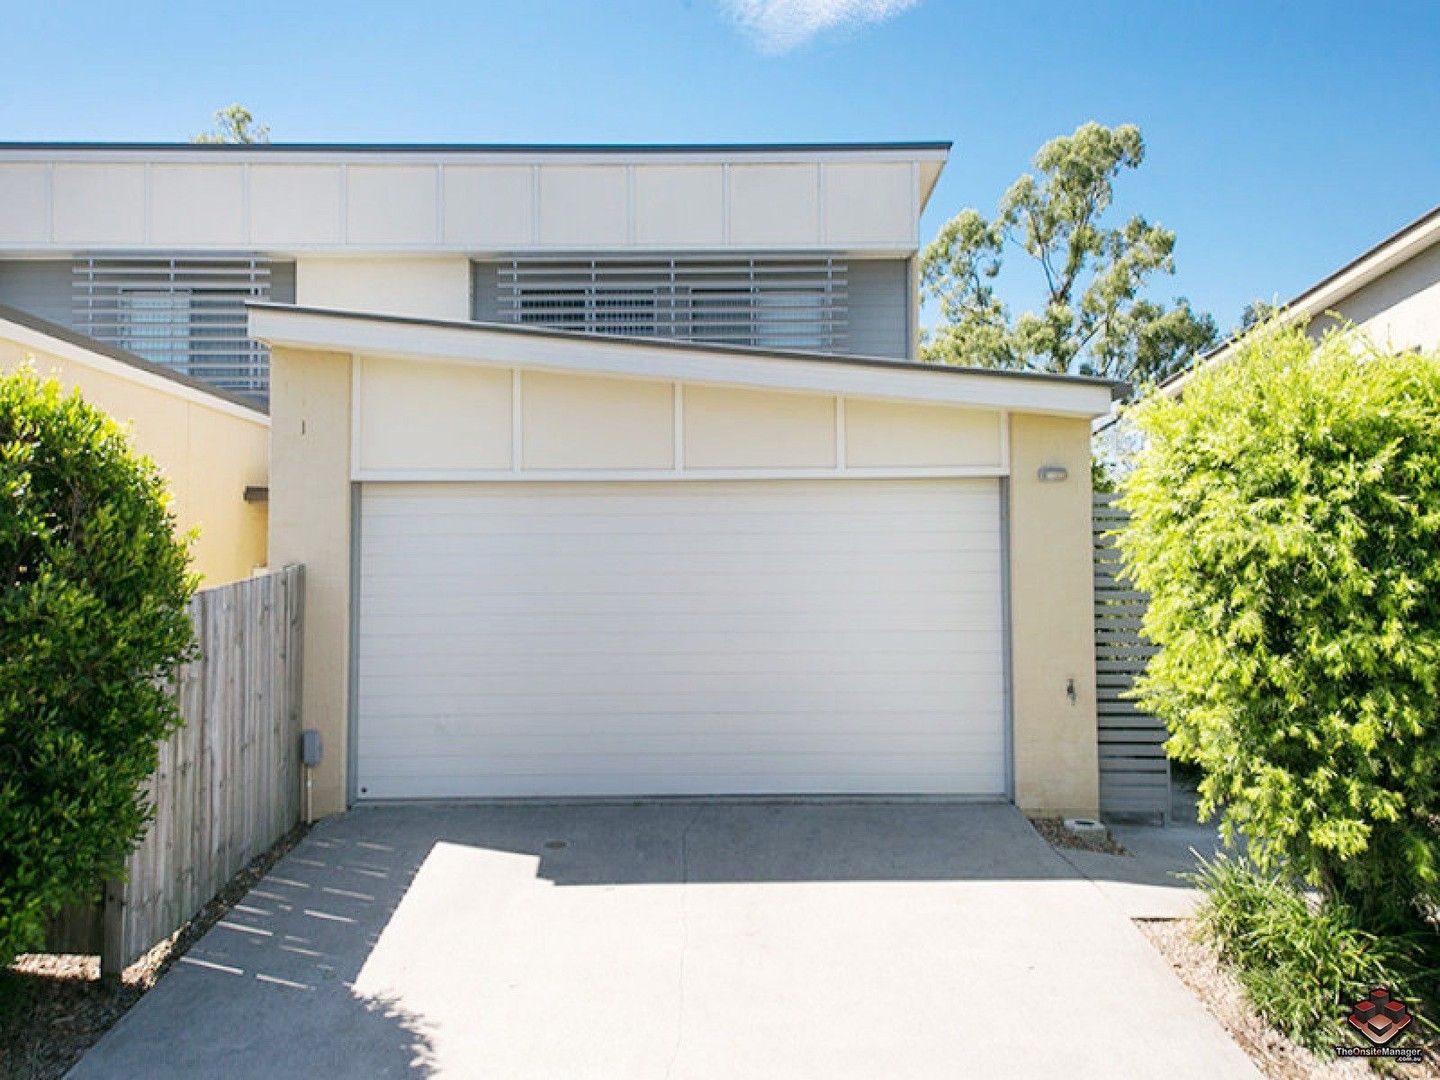 3 bedrooms Townhouse in 28/28 336 King Avenue DURACK QLD, 4077